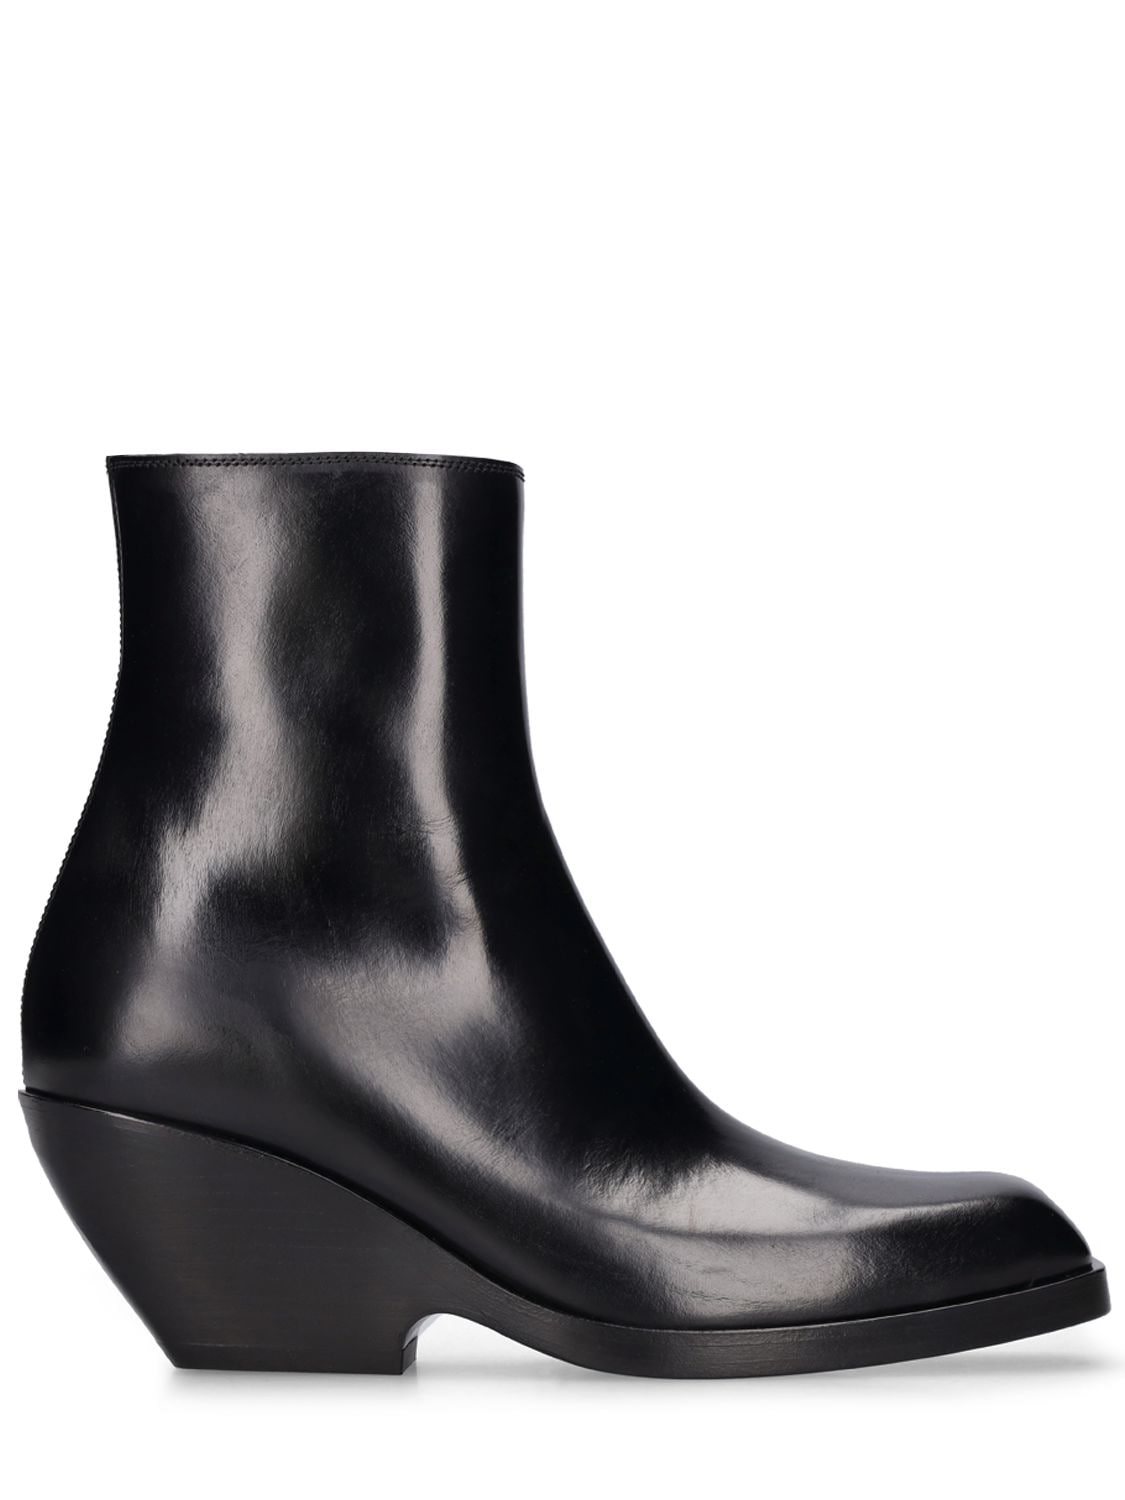 KHAITE 40mm Hooper Leather Ankle Boots